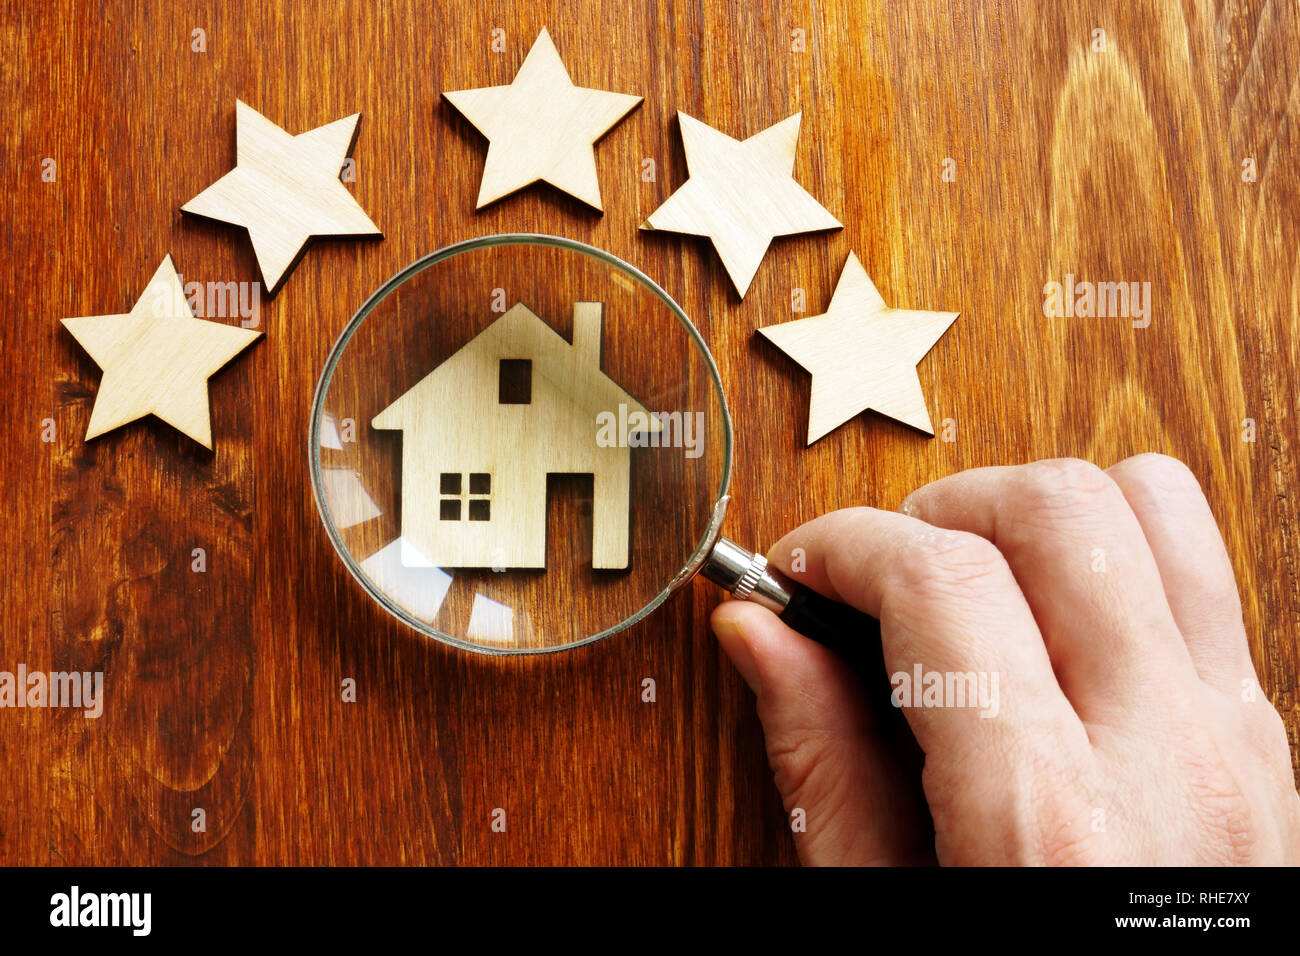 Property assessment concept. Hand holds magnifier, model of home and 5 stars. Stock Photo